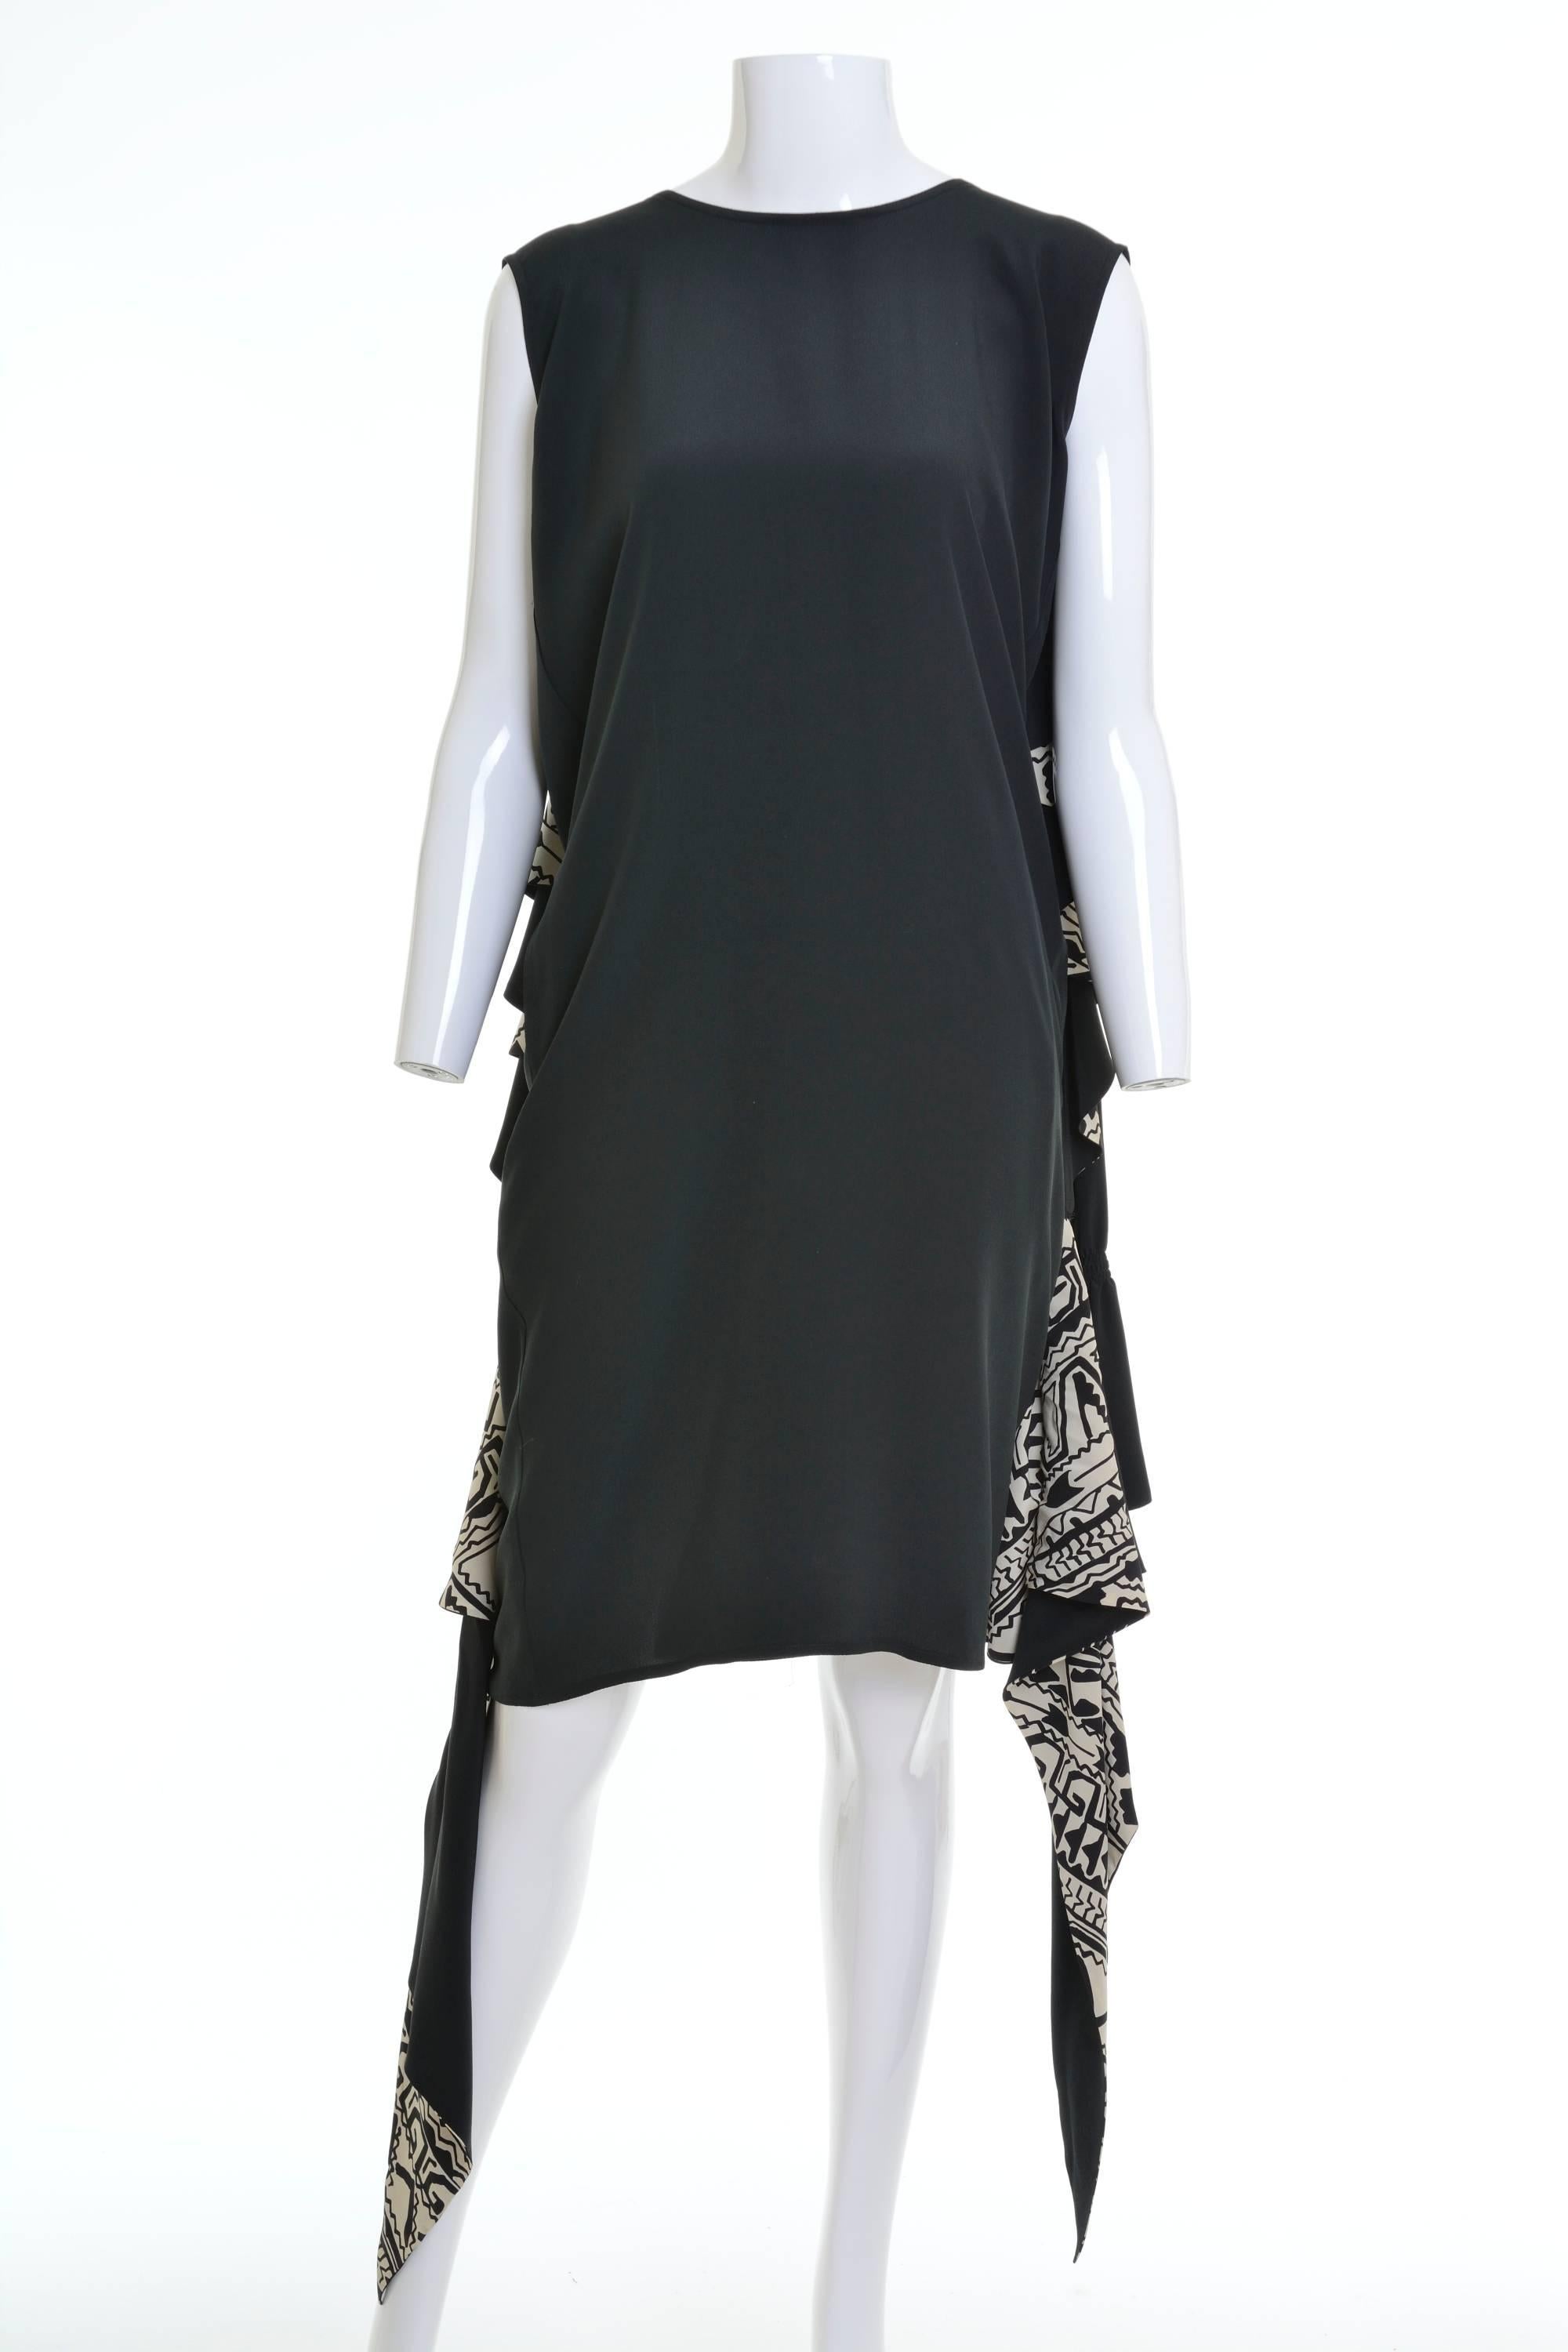 1980s Cadette dress in a black and white silk fabric, tunic dress with side pockets, it has overcoat is stitched on the shoulders of the dress to let it hang easily behind, turn up cuff with a black and white abstract pattern, ruffle opening and